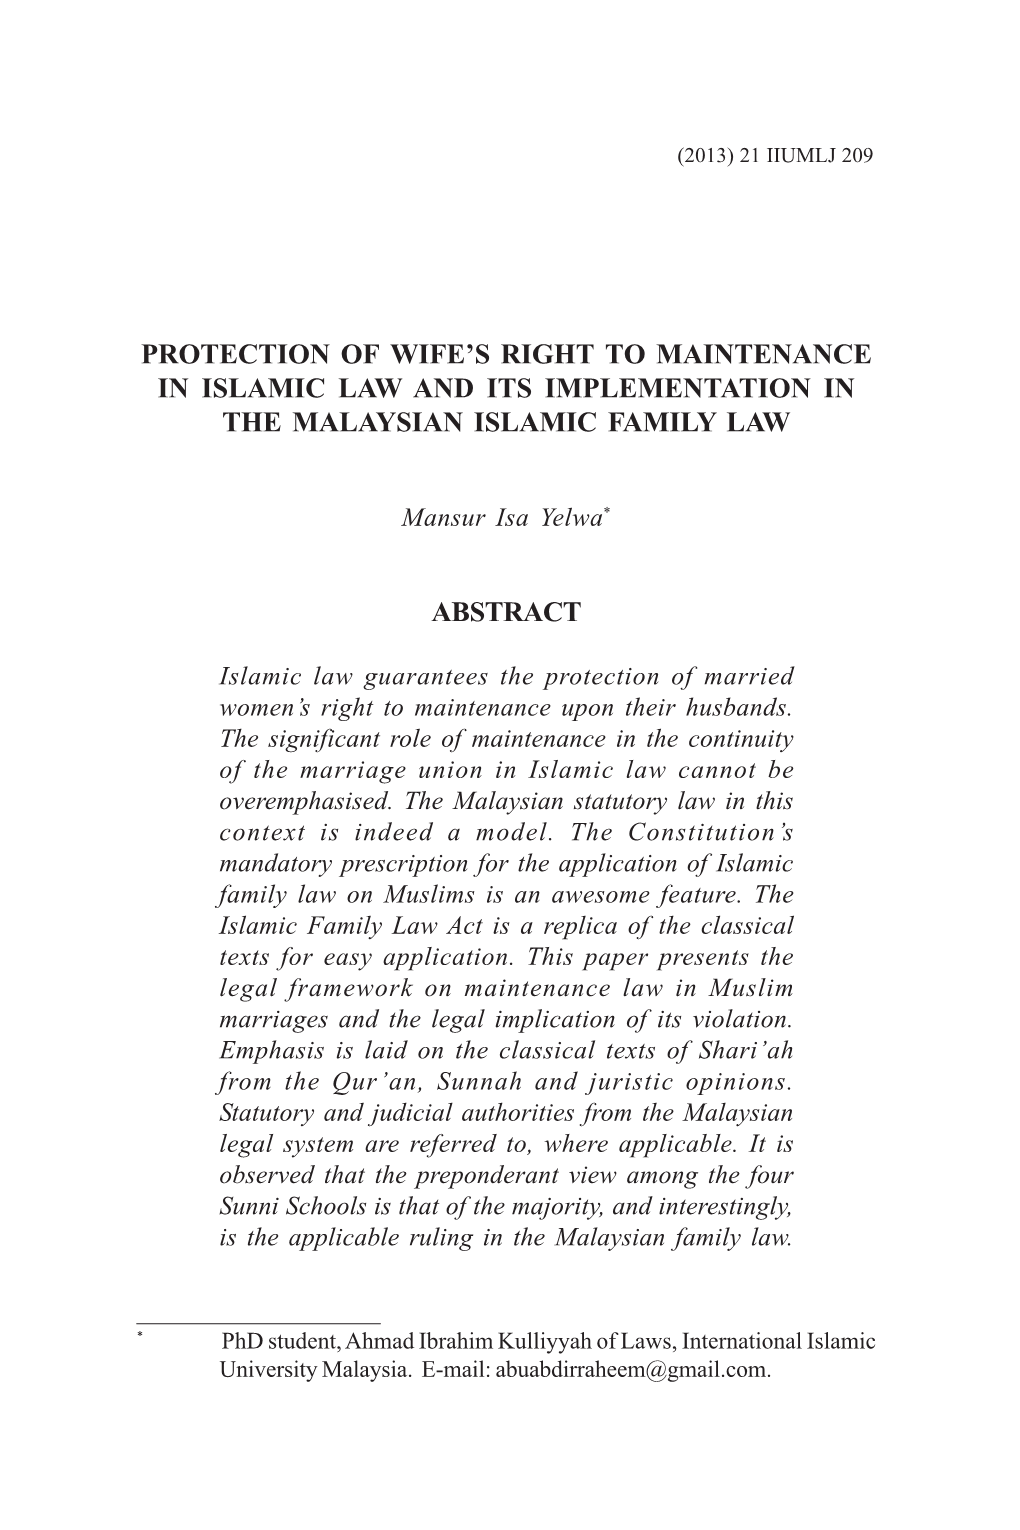 Protection of Wife's Right to Maintenance in Islamic Law and Its